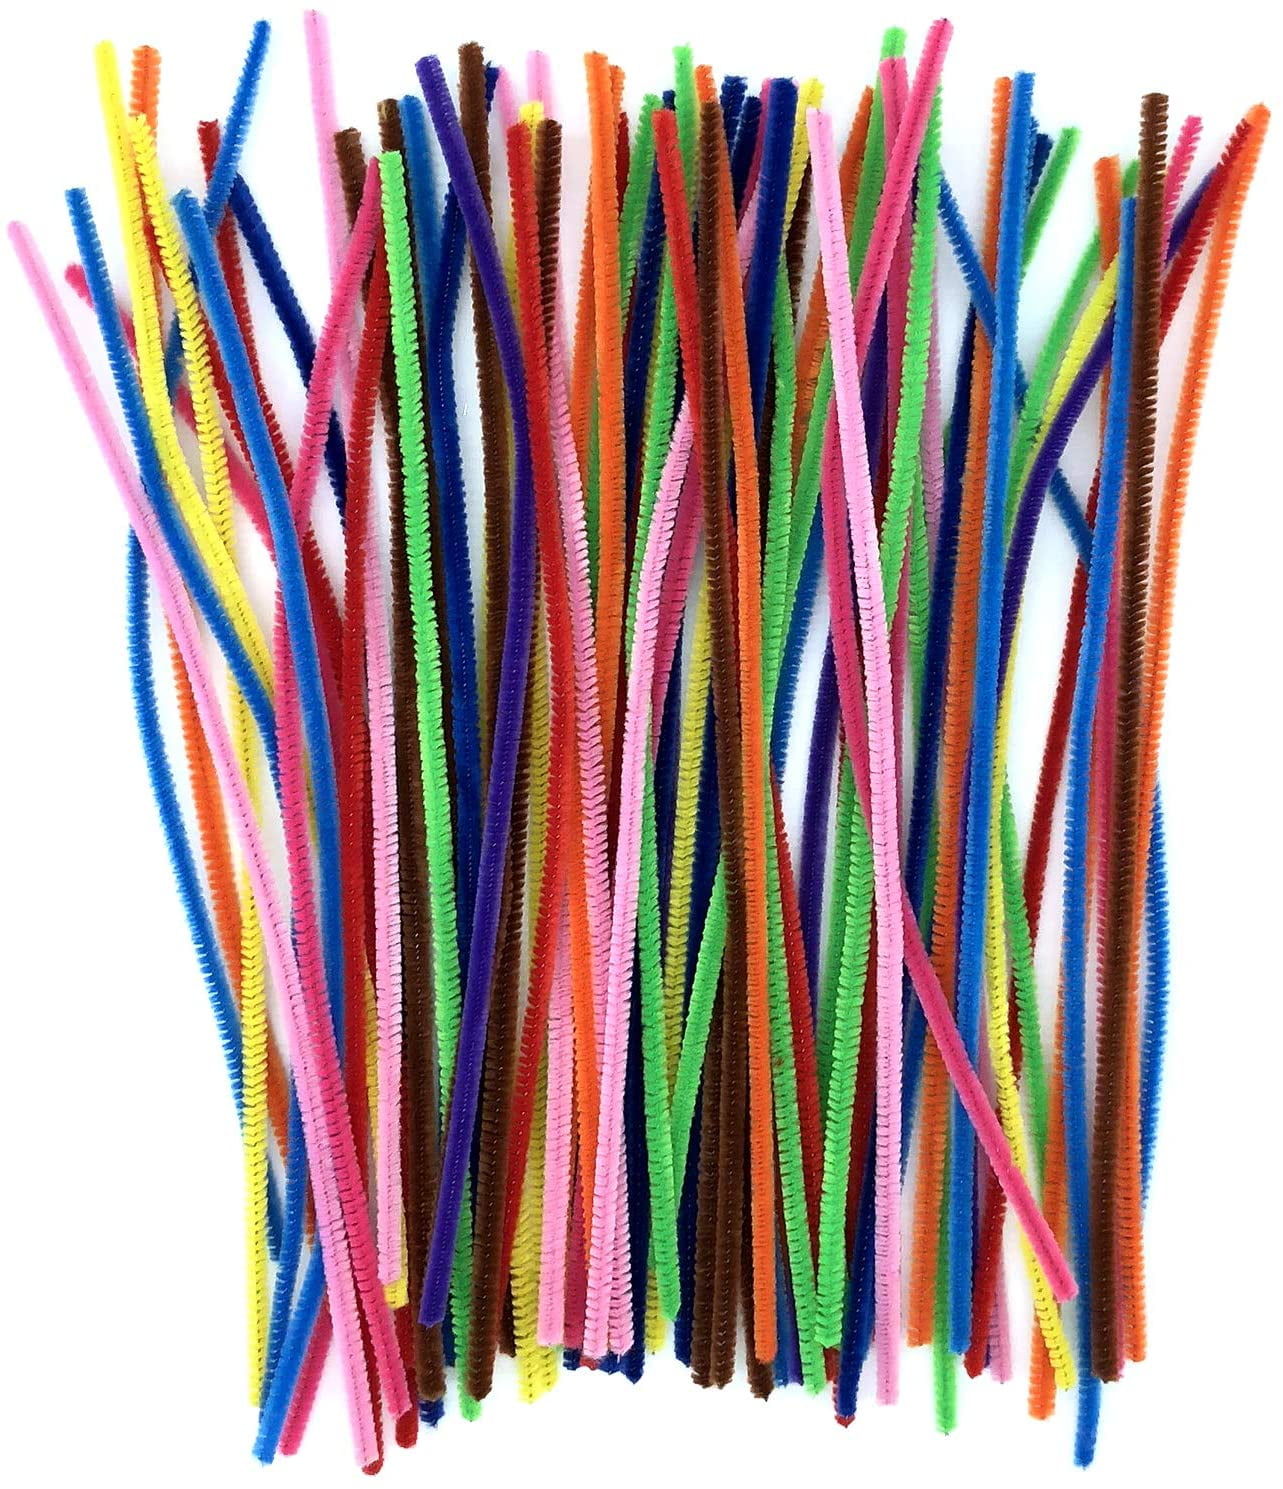 Zxiixz 100 Pcs Pipe Cleaners, Black Chenille Stems Creative Craft Pipe Cleaners for Crafts Decorations, Boutiques, Sewing, Weddings, Home